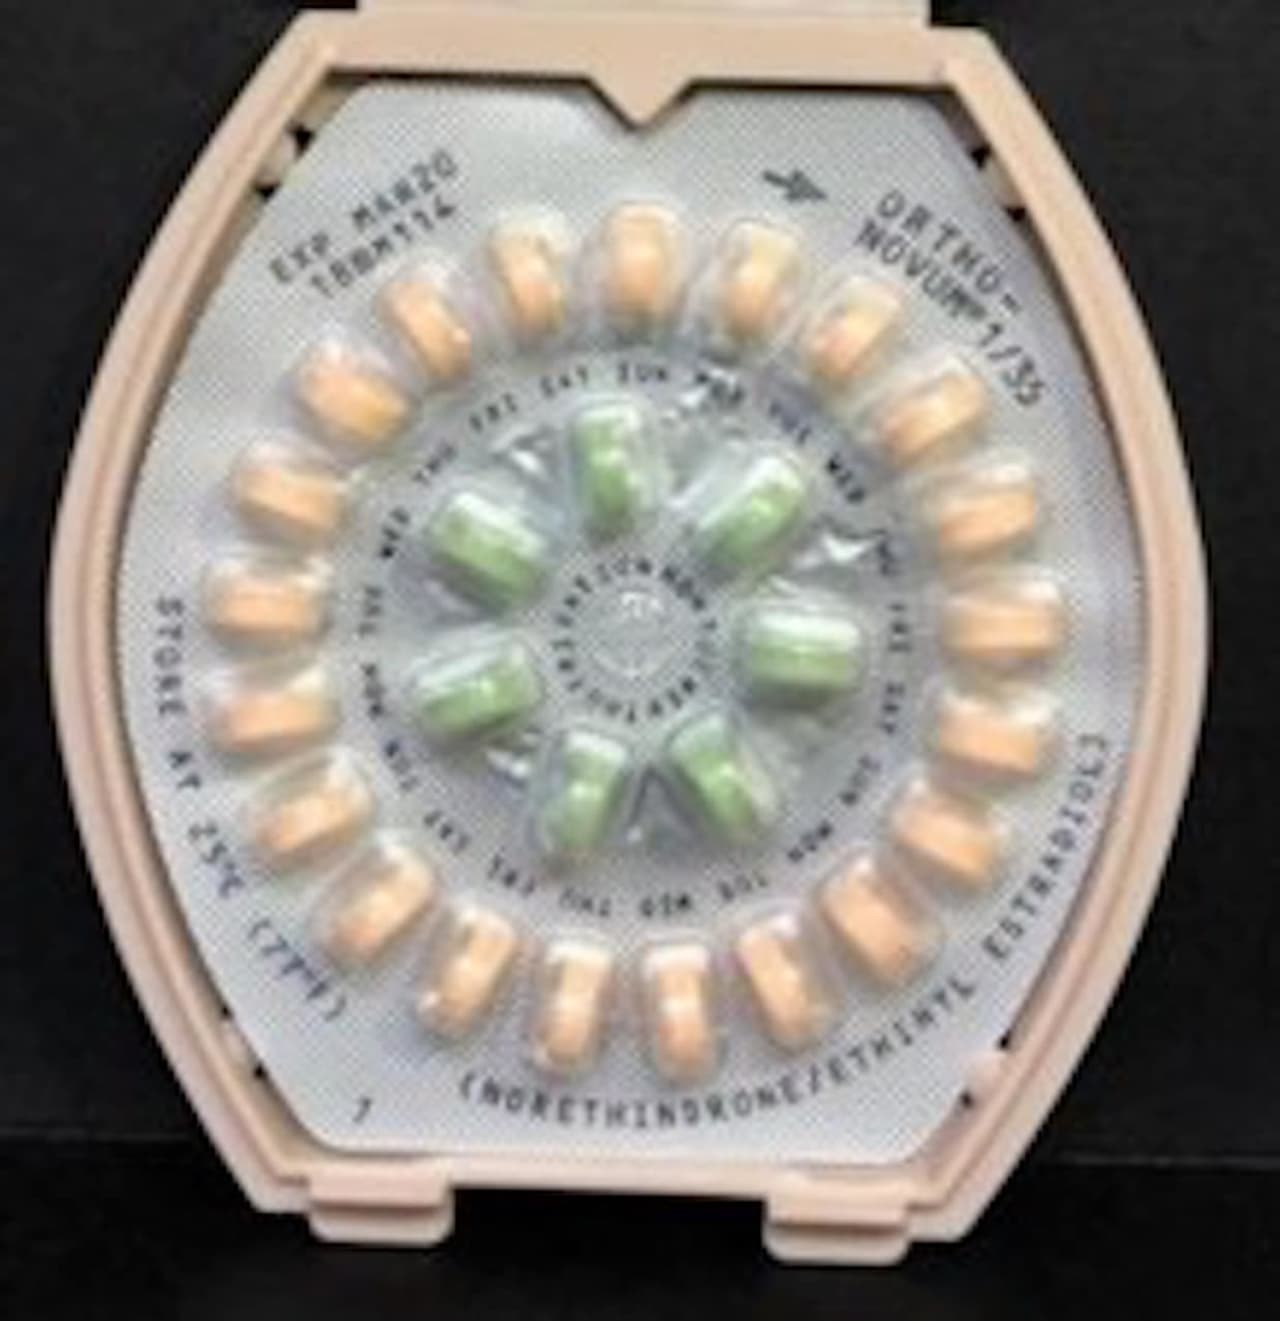 The FDA is recalling a birth control product.